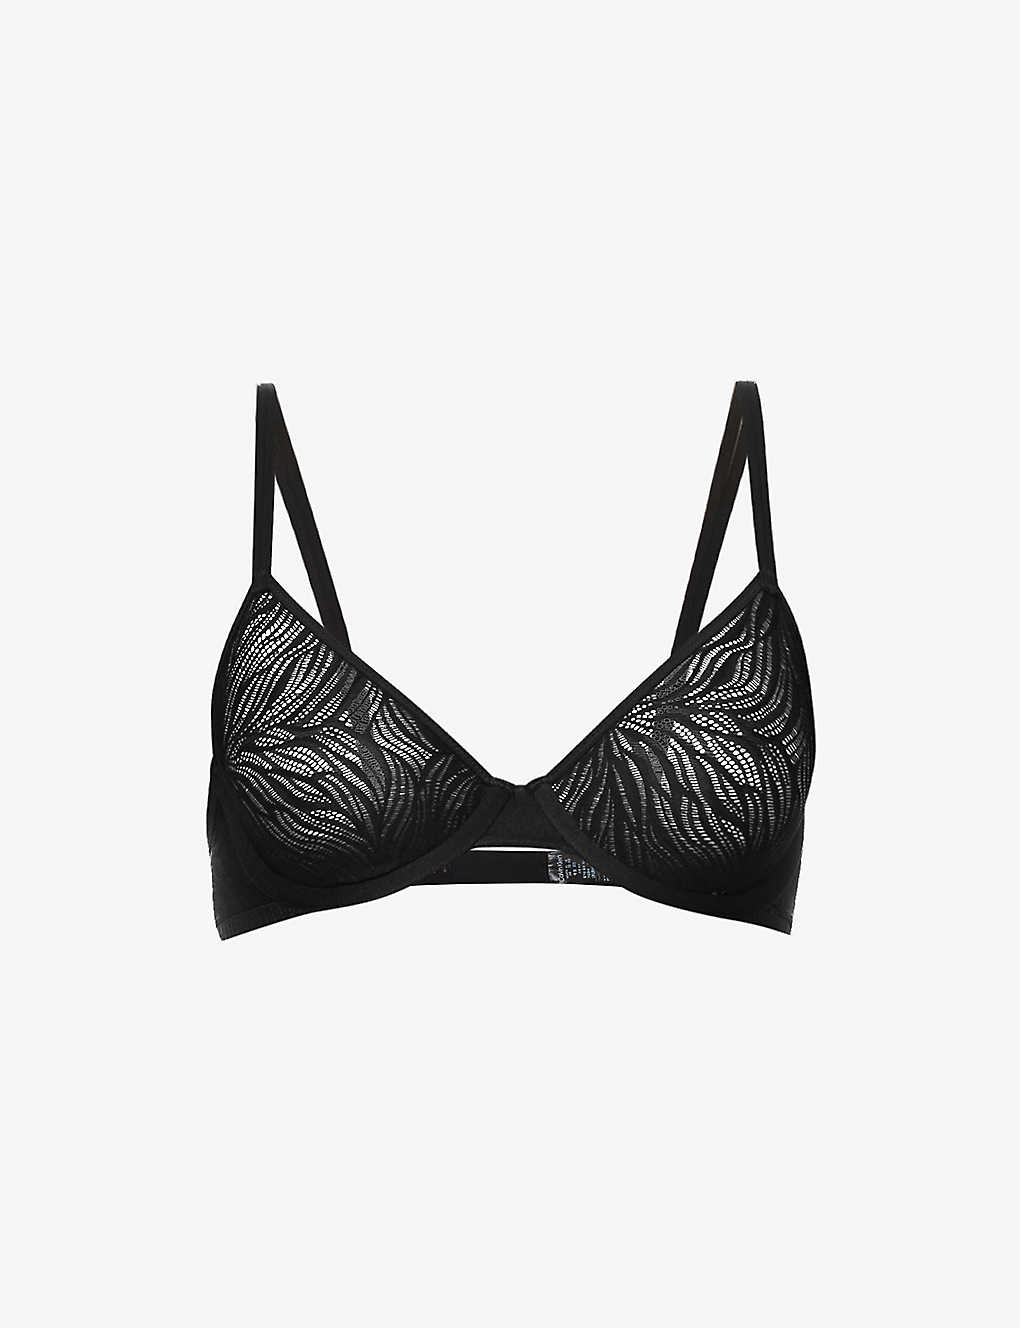 Calvin Klein Womens Black Sheer Marquisette Embroidered Stretch-lace Bra